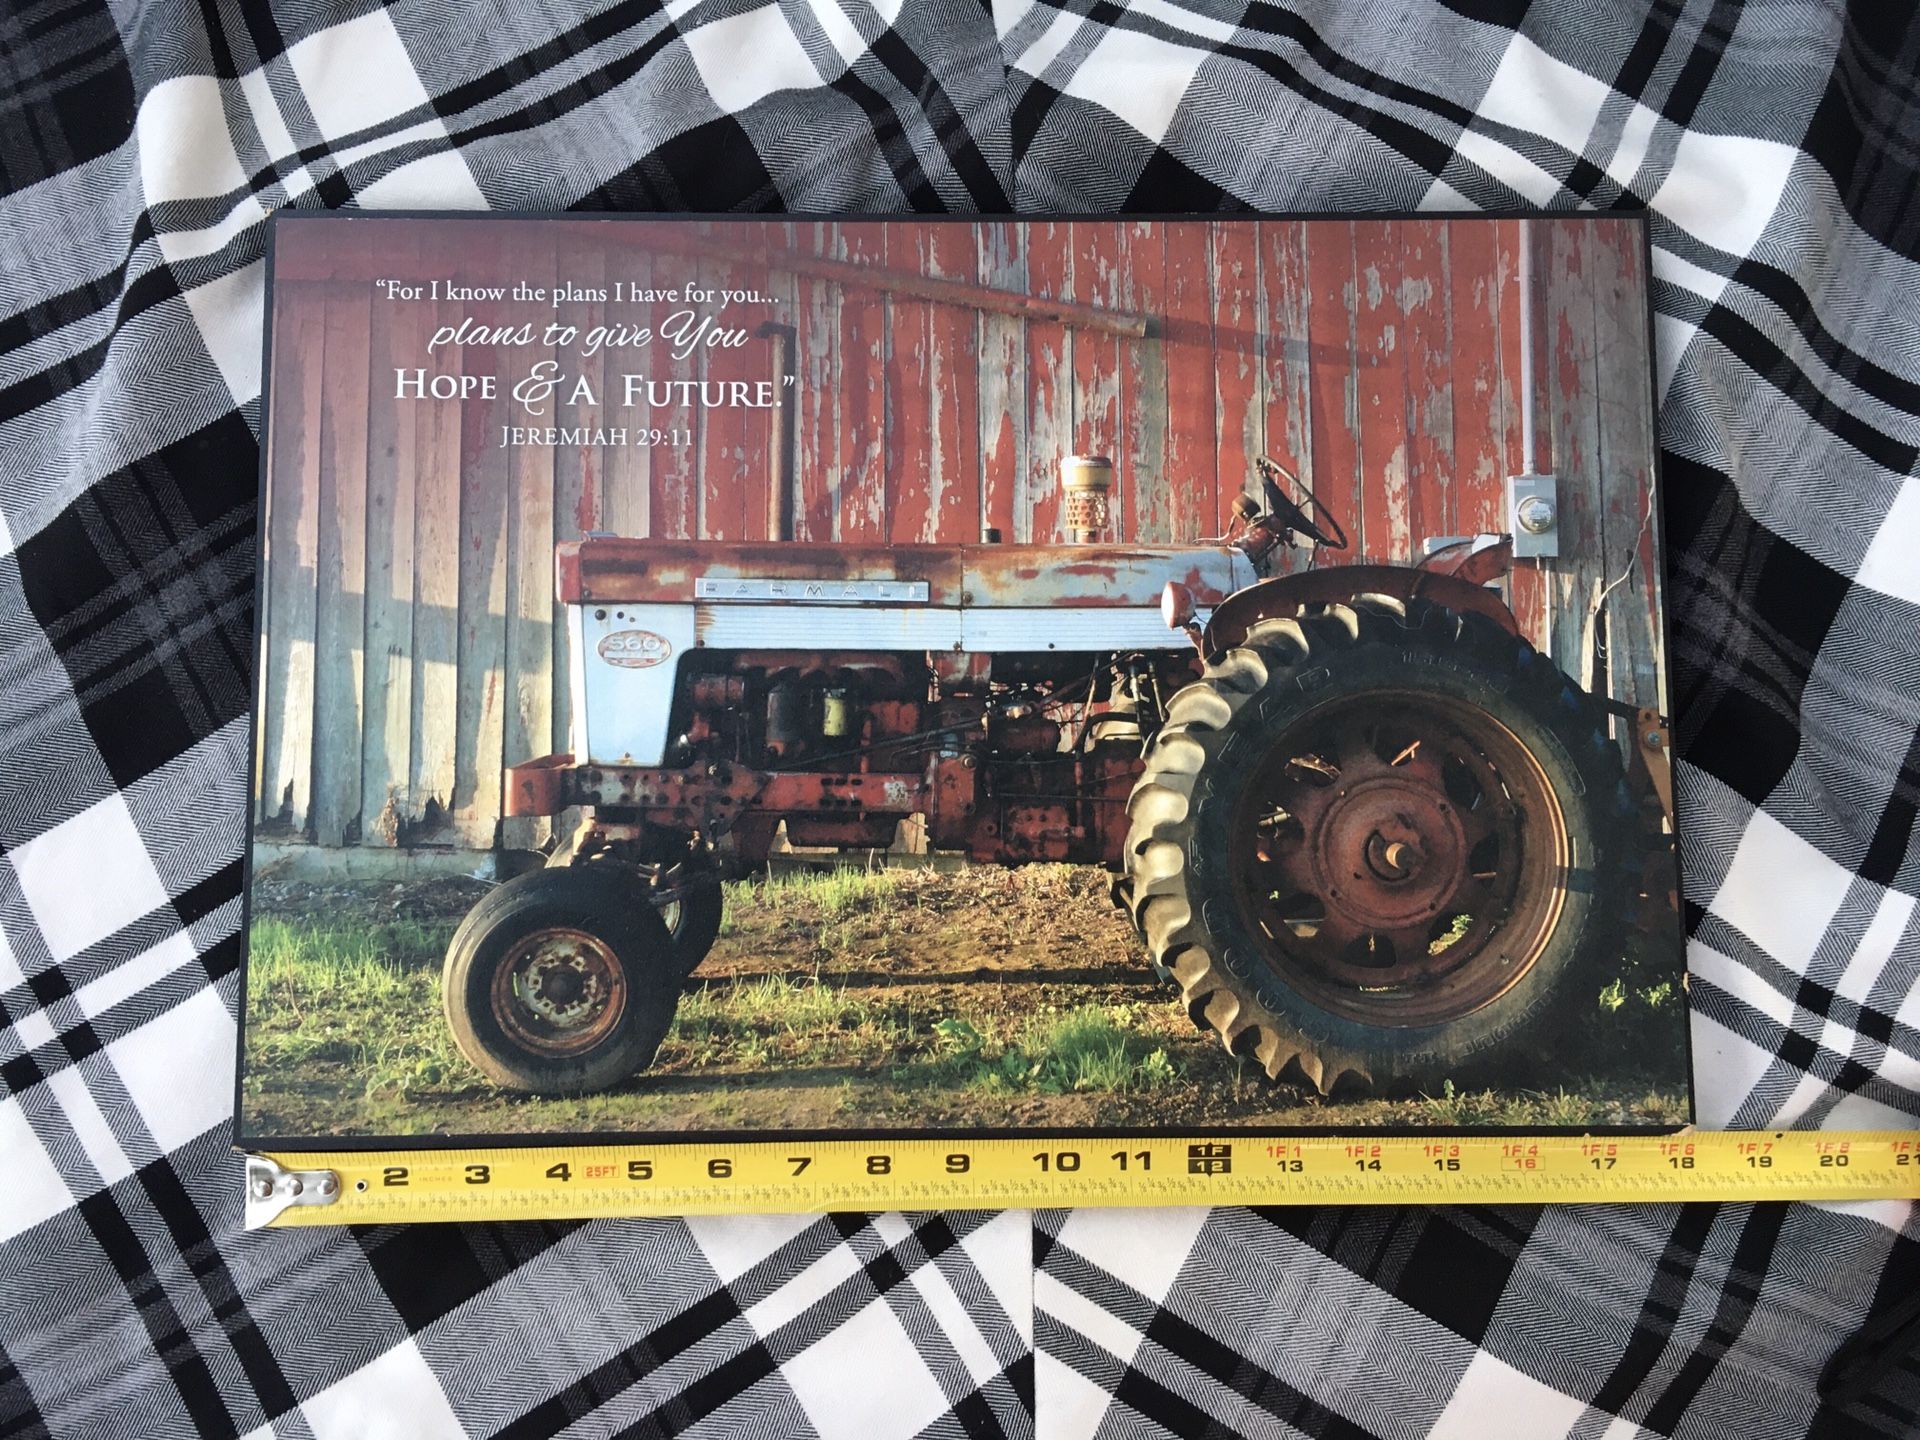 Tractor and barn/farmhouse inspirational message picture